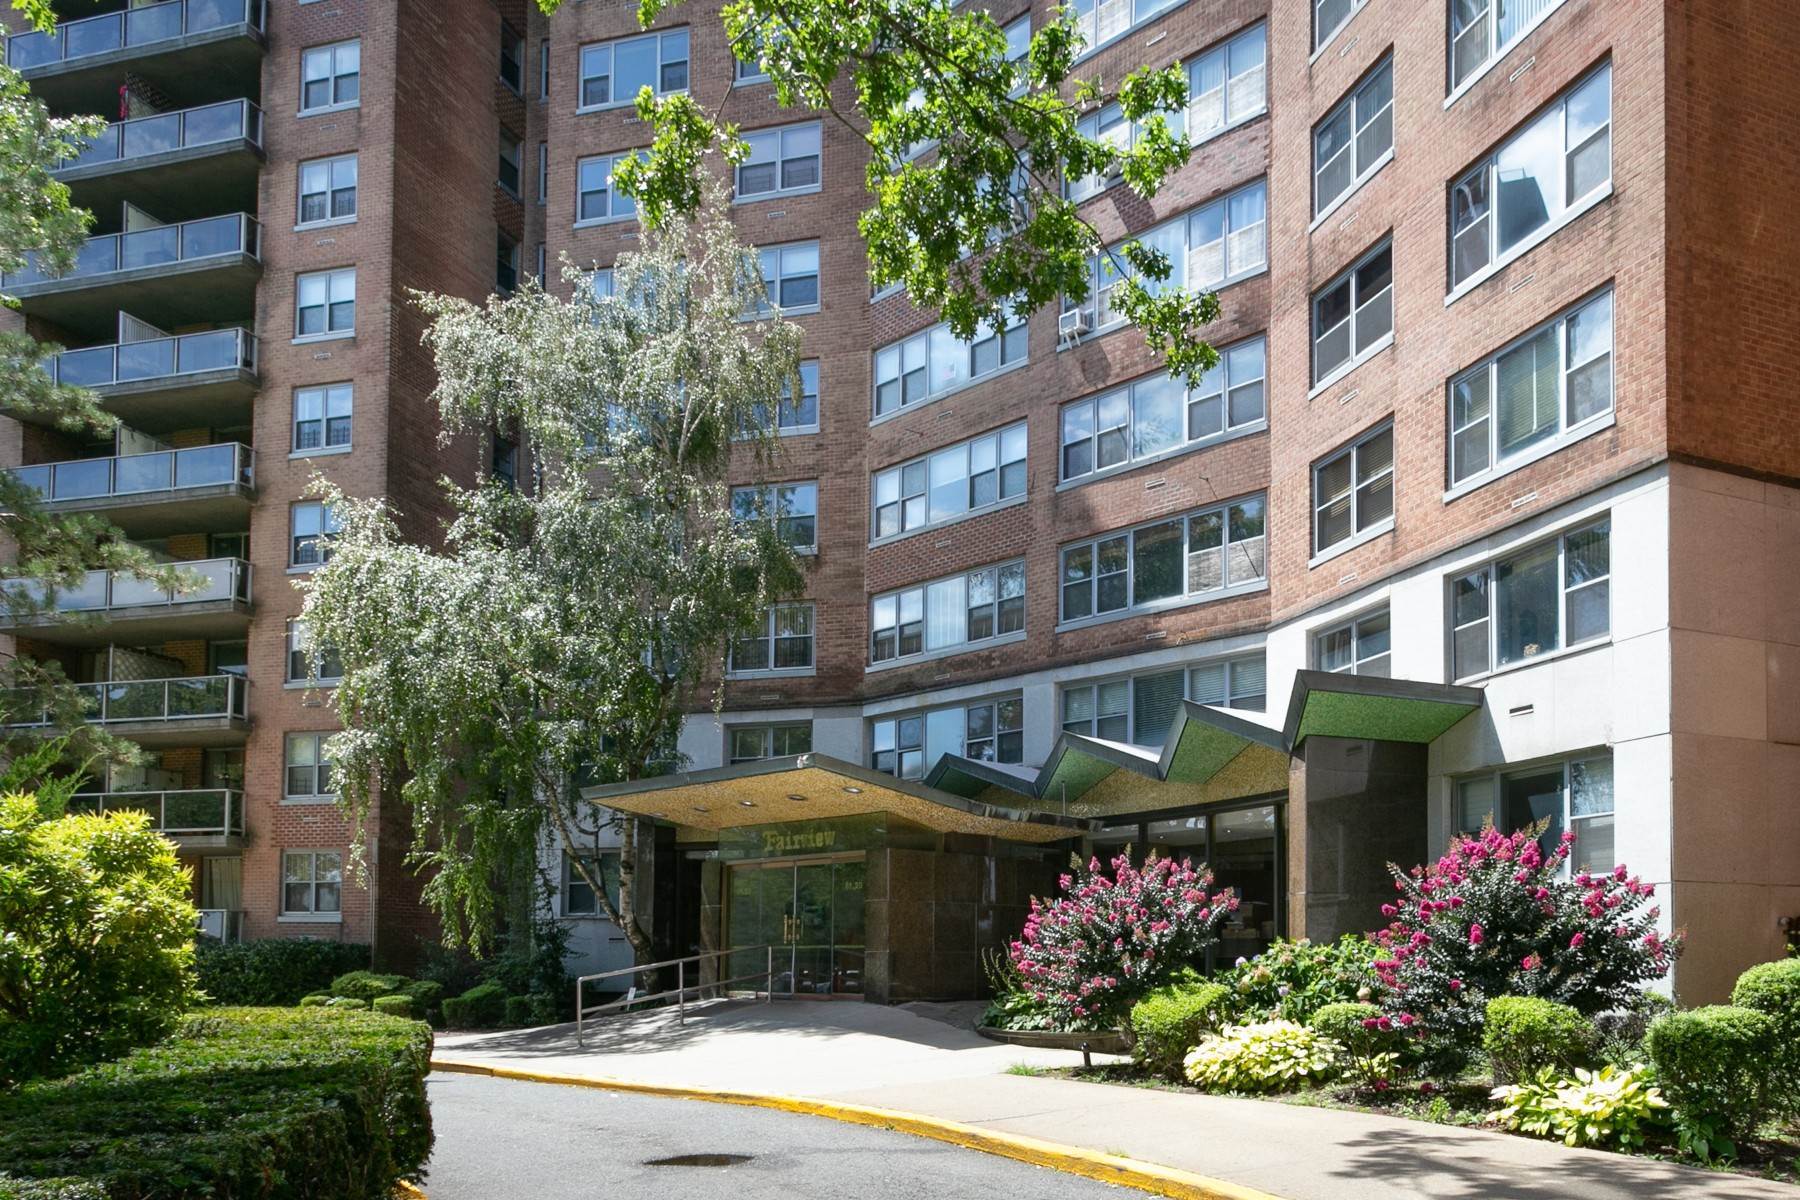 Co-op Properties for Sale at 'CONVENIENTLY LOCATED FOREST HILLS CO-OP WITH ALL THE AMENITIES' 61-20 Grand Central Parkway, #C500 Forest Hills, New York 11375 United States